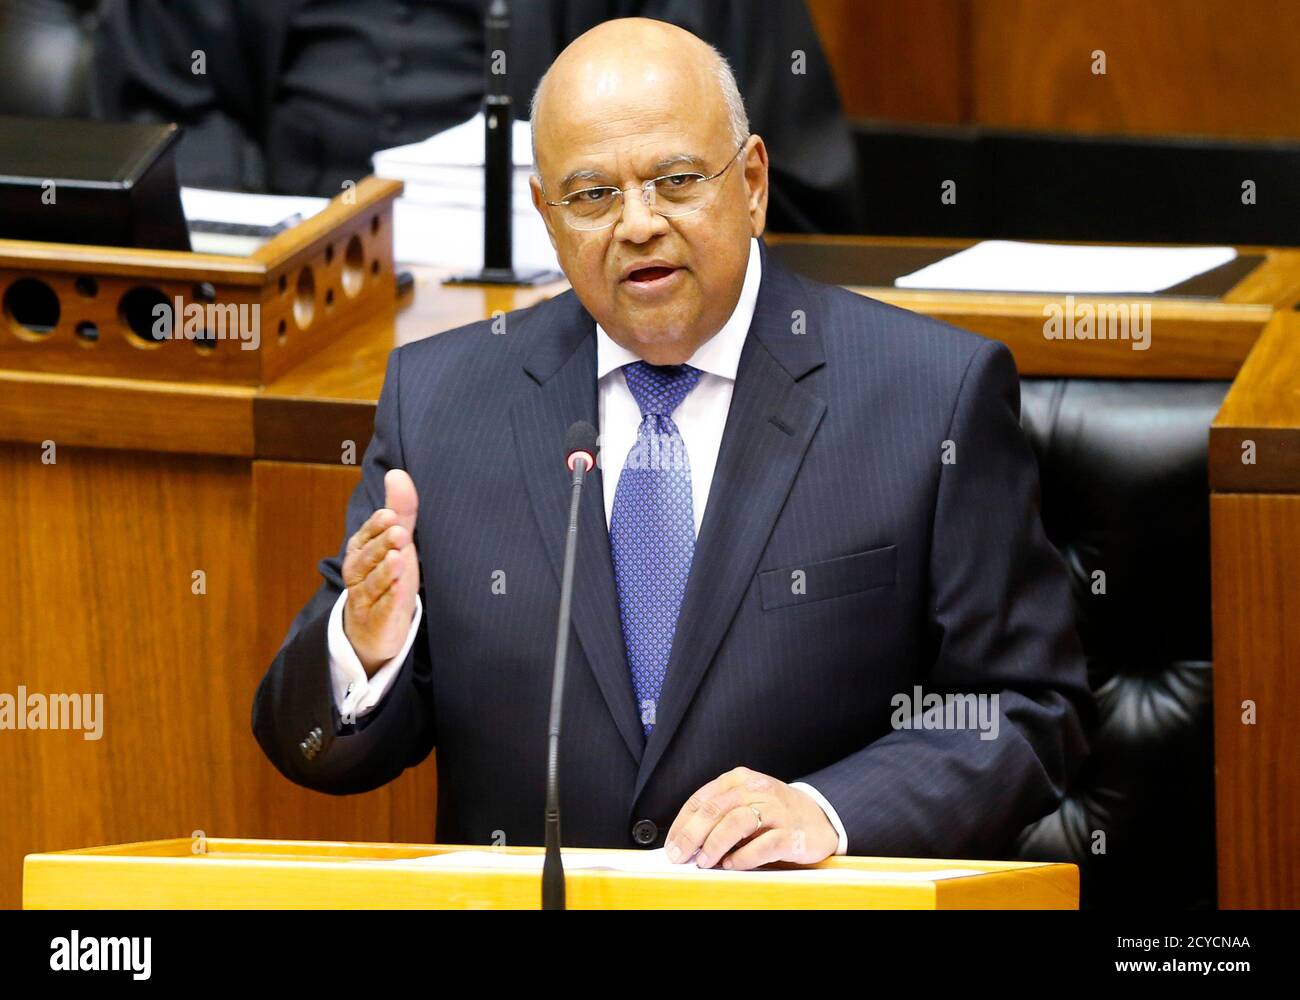 South Africa's Finance Minister Pravin Gordhan delivers his 2014 budget address at Parliament in Cape Town February 26, 2014. South Africa cut this year's growth forecast to 2.7 percent, saying deep challenges persisted after a 2009 recession and warning that delays to new infrastructure, especially in the power sector, posed risks to the continent's largest economy. REUTERS/Mike Hutchings (SOUTH AFRICA - Tags: POLITICS BUSINESS) Stock Photo